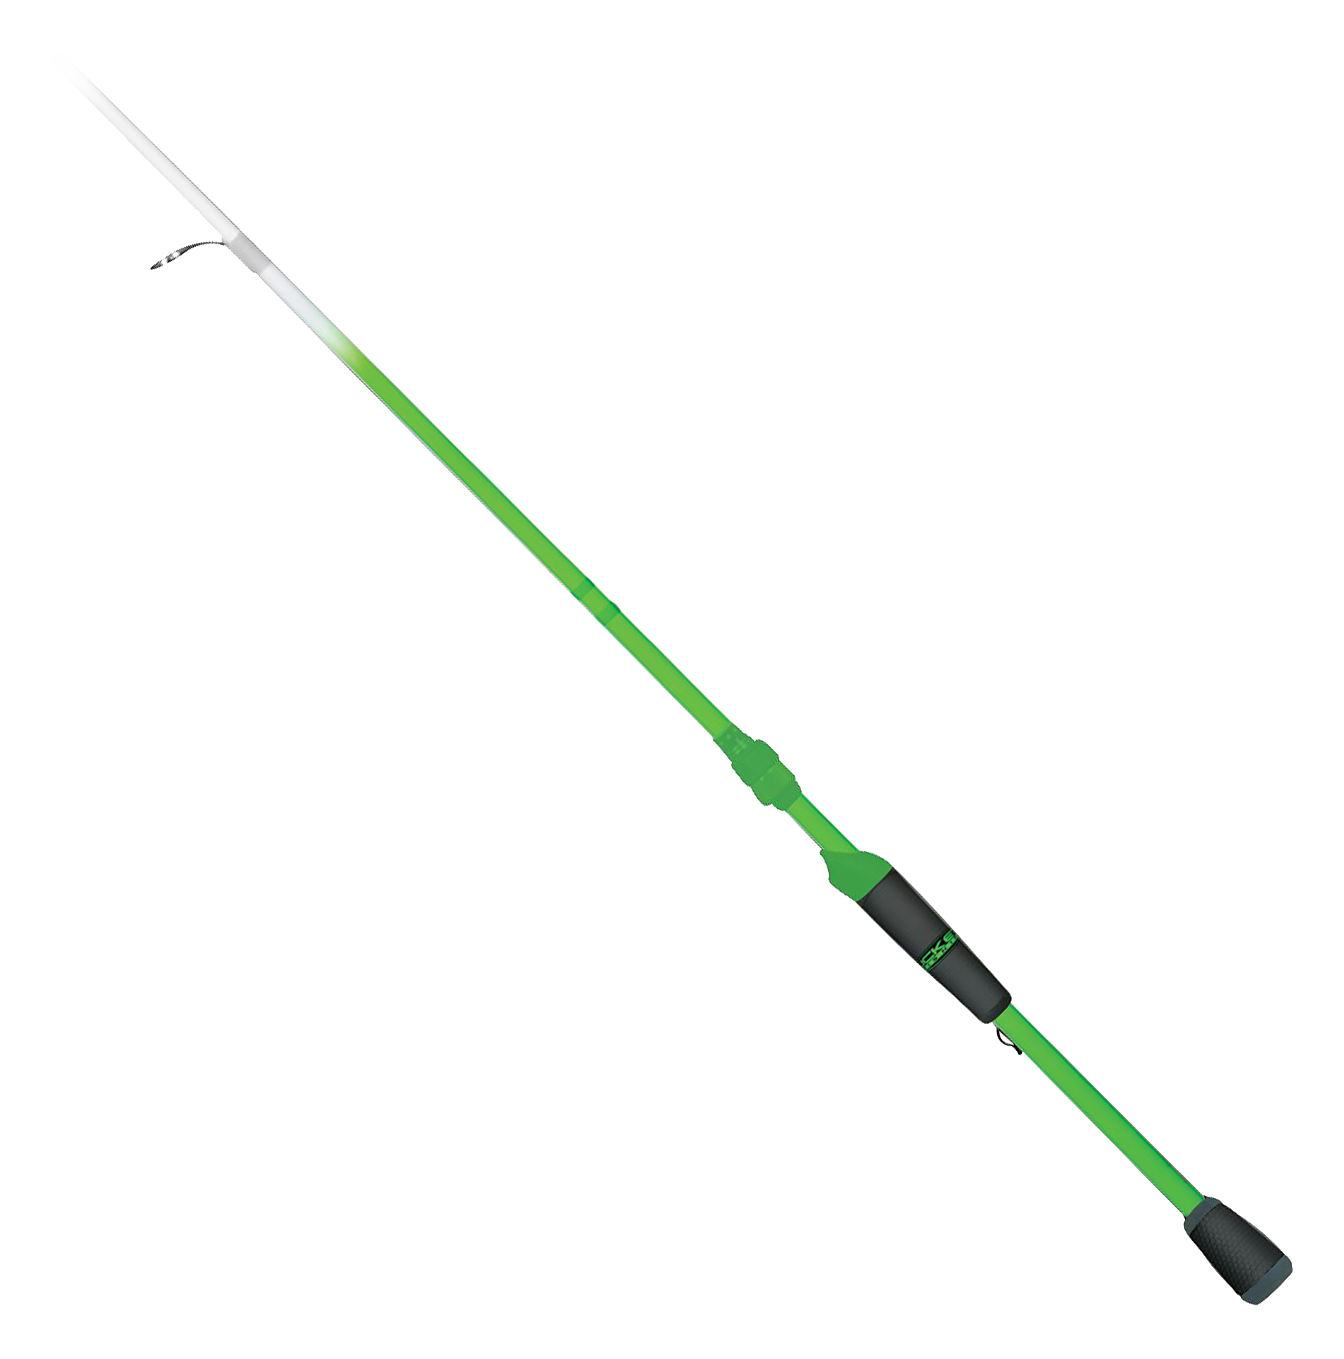 Discount Duckett Fishing Ghost 7 ft - Medium Heavy Casting Rod for Sale, Online Fishing Rods Store